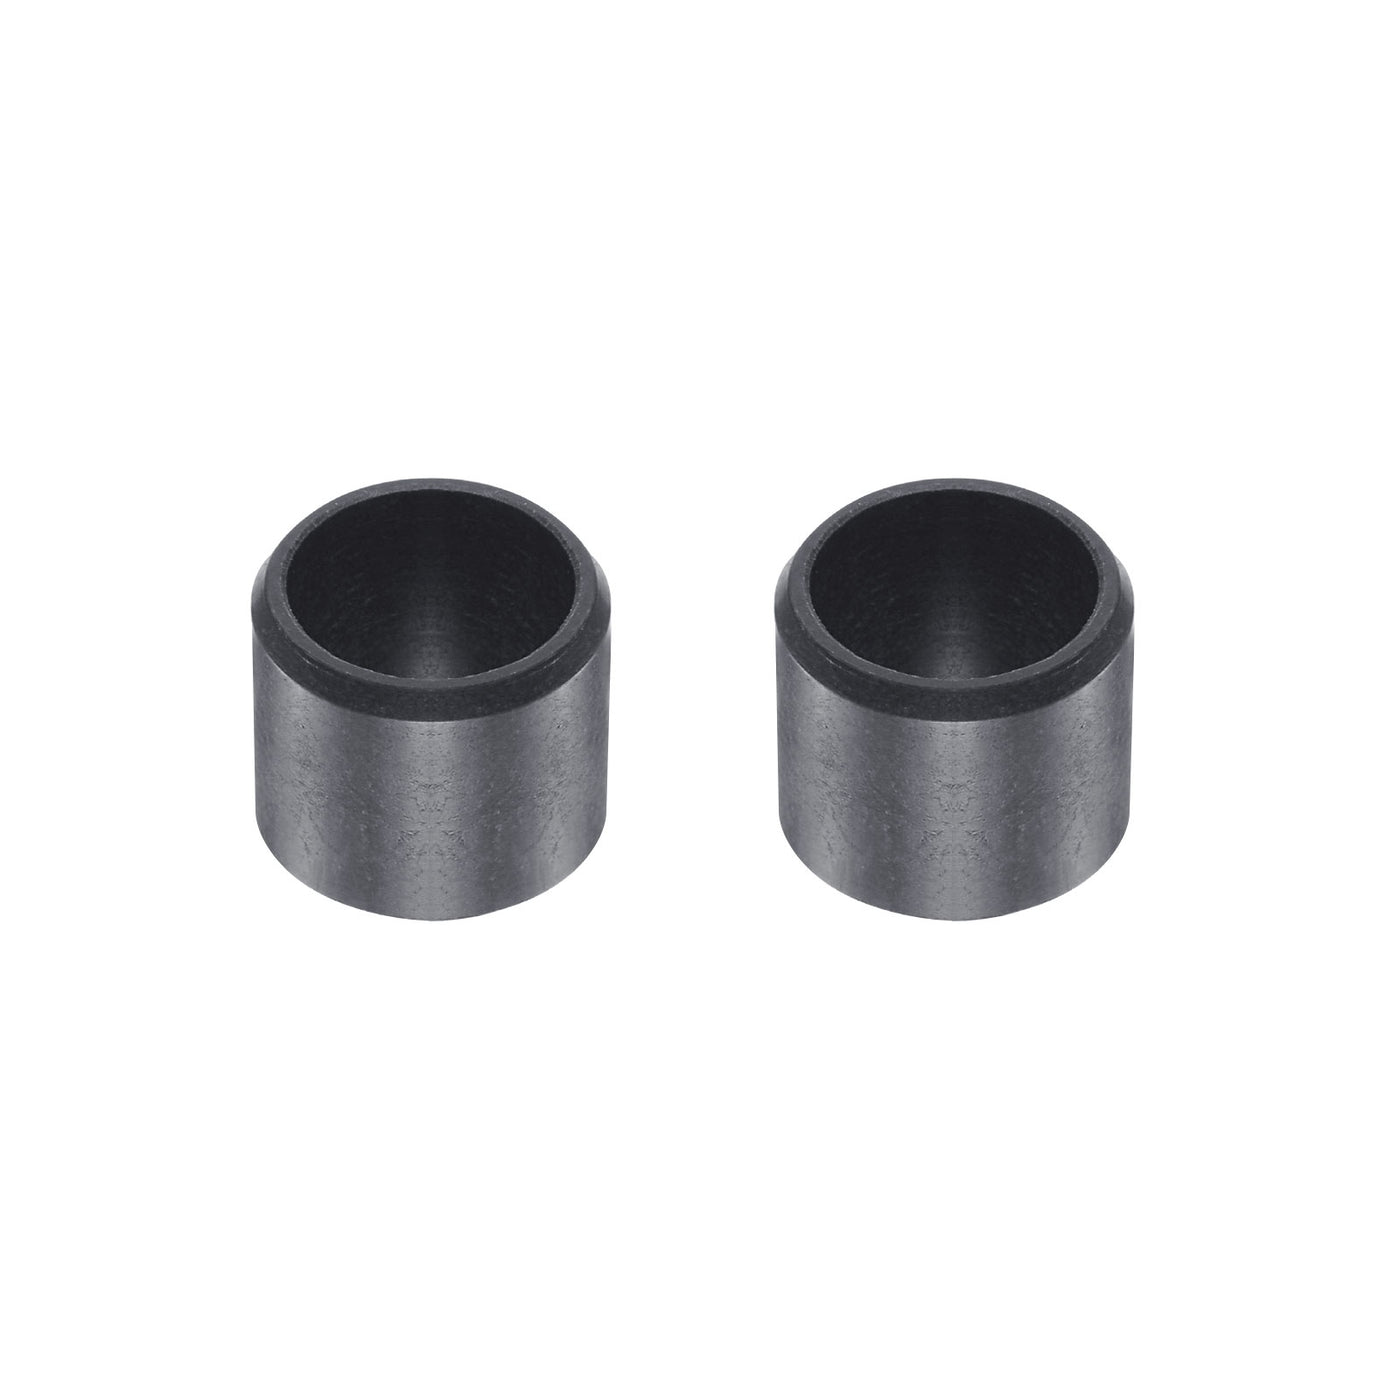 uxcell Uxcell Sleeve Bearings 8mmx10mmx6mm POM Wrapped Oilless Bushings Black 2pcs